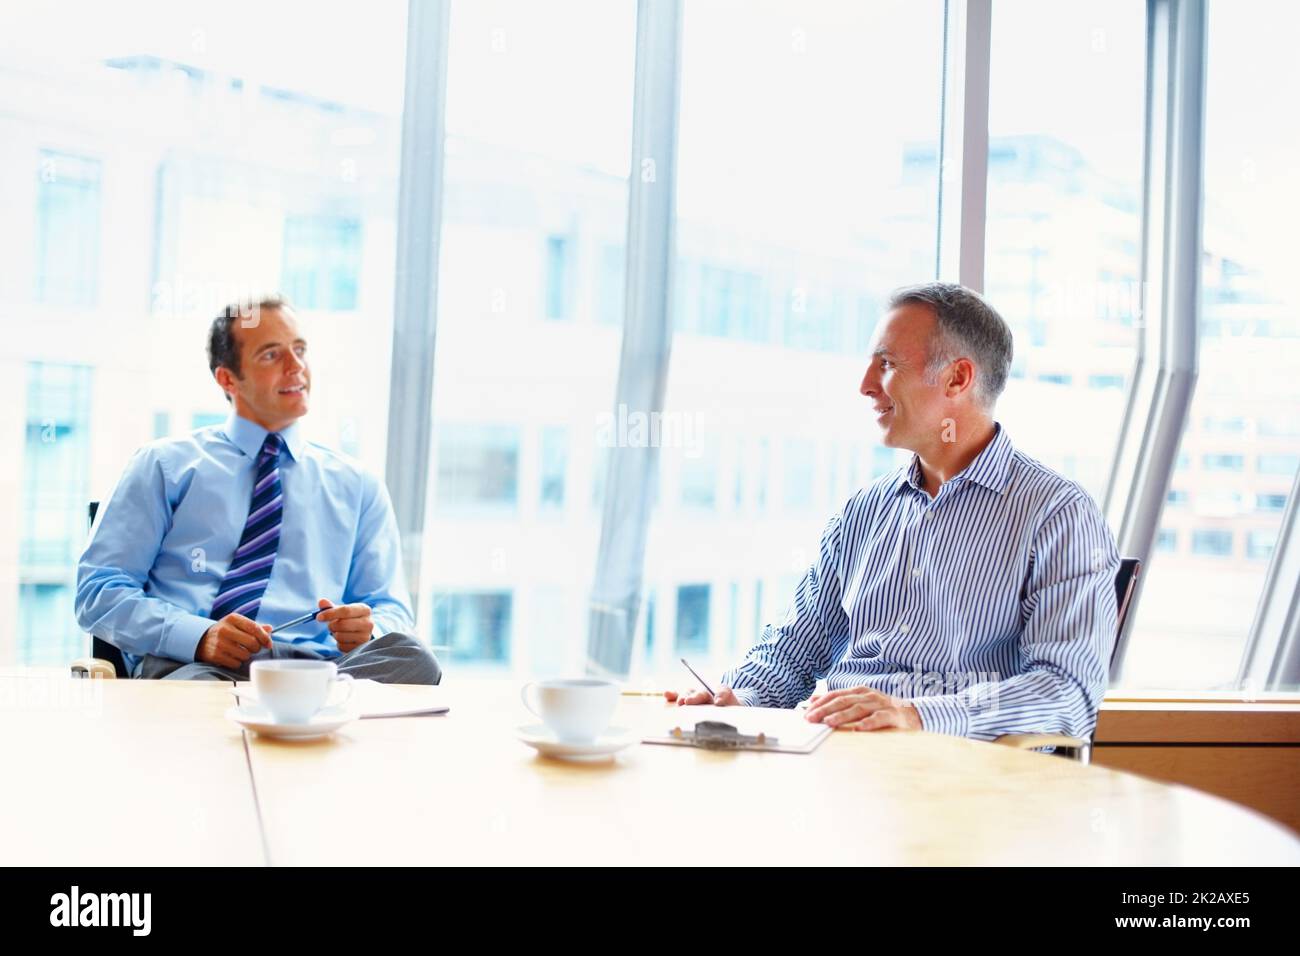 Executives in casual meeting over coffee. Two business men having casual meeting indoors at table. Stock Photo